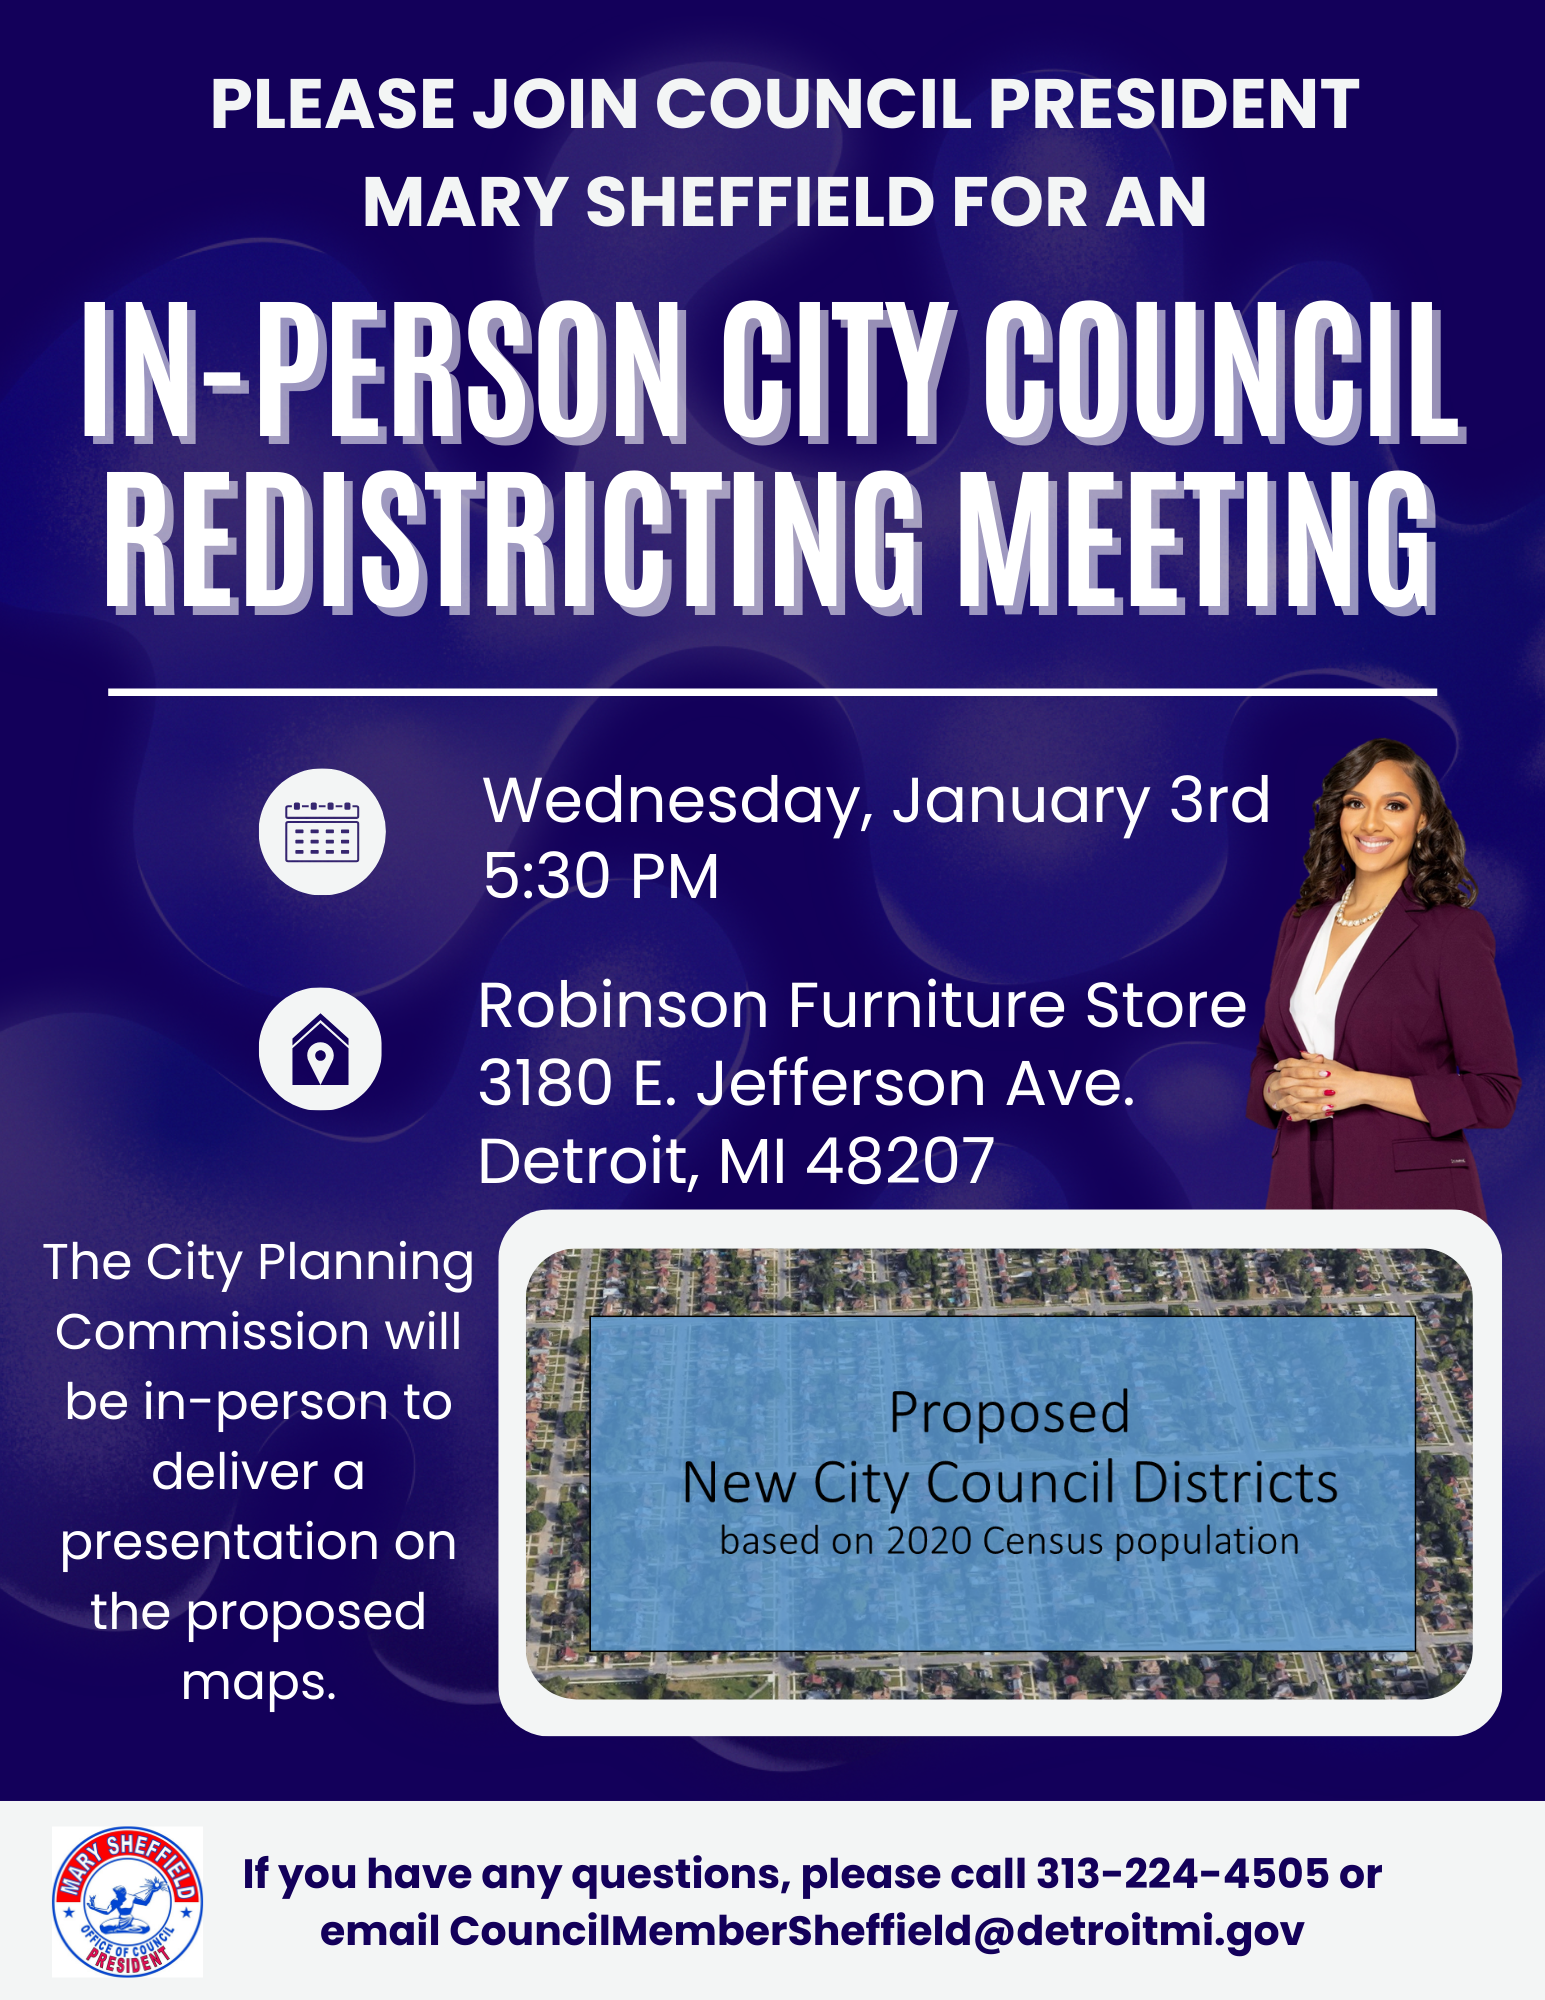 Council President Sheffield to Host In-Person City Council Redistricting Meeting on Wednesday, January 3rd